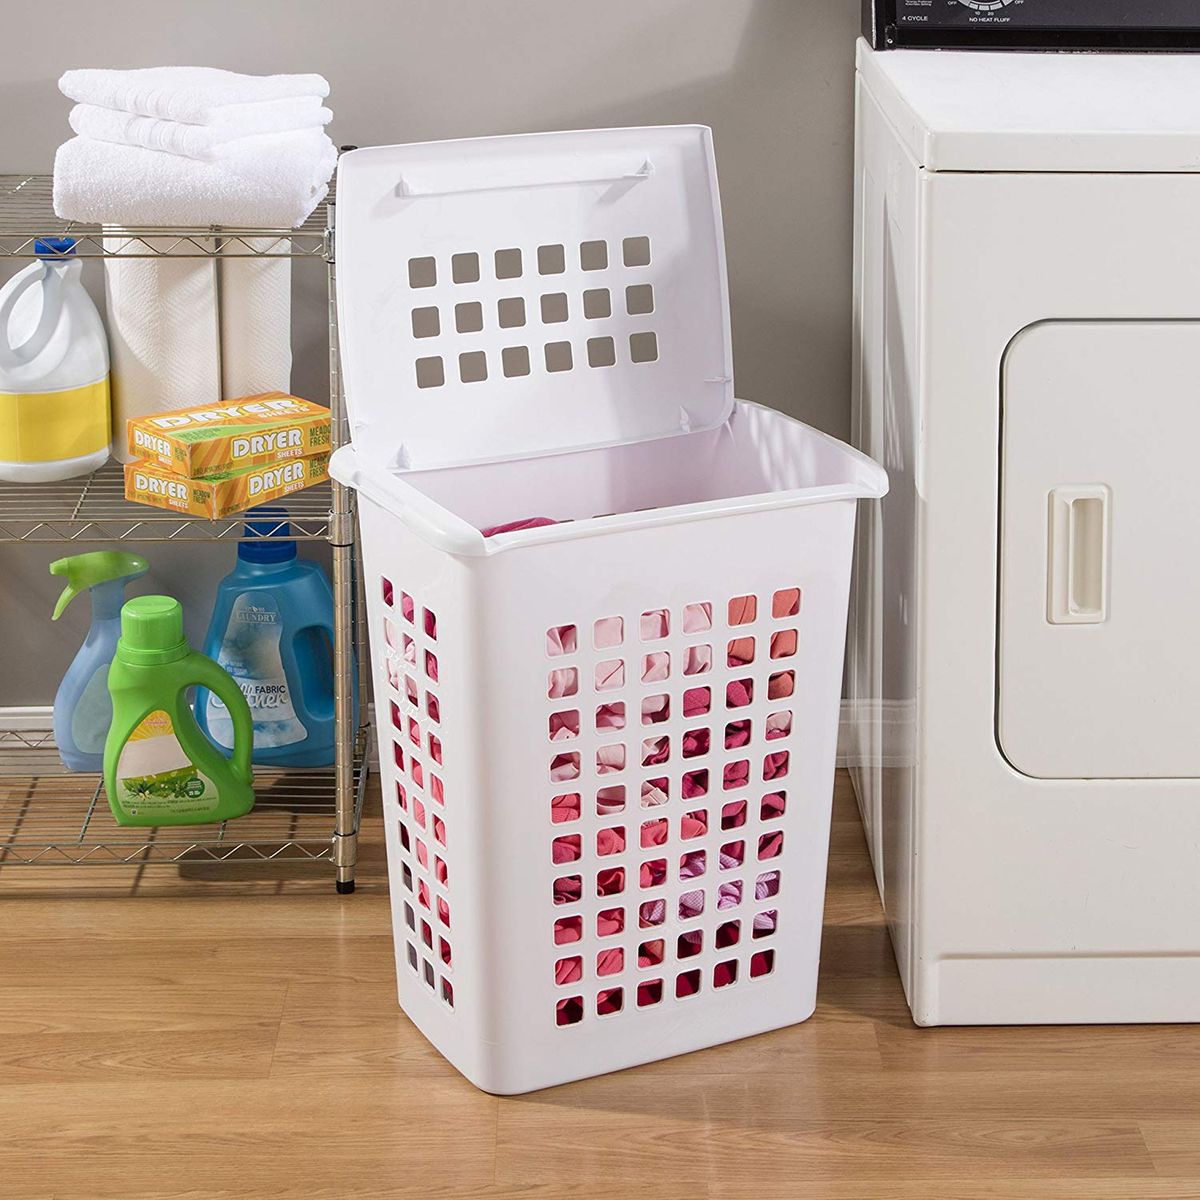 Laundry Baskets 2 x 60 L Set of 2 Sturdy Laundry Baskets Laundry Bags to Help Sort Clothes and Toys Without Collapsing 